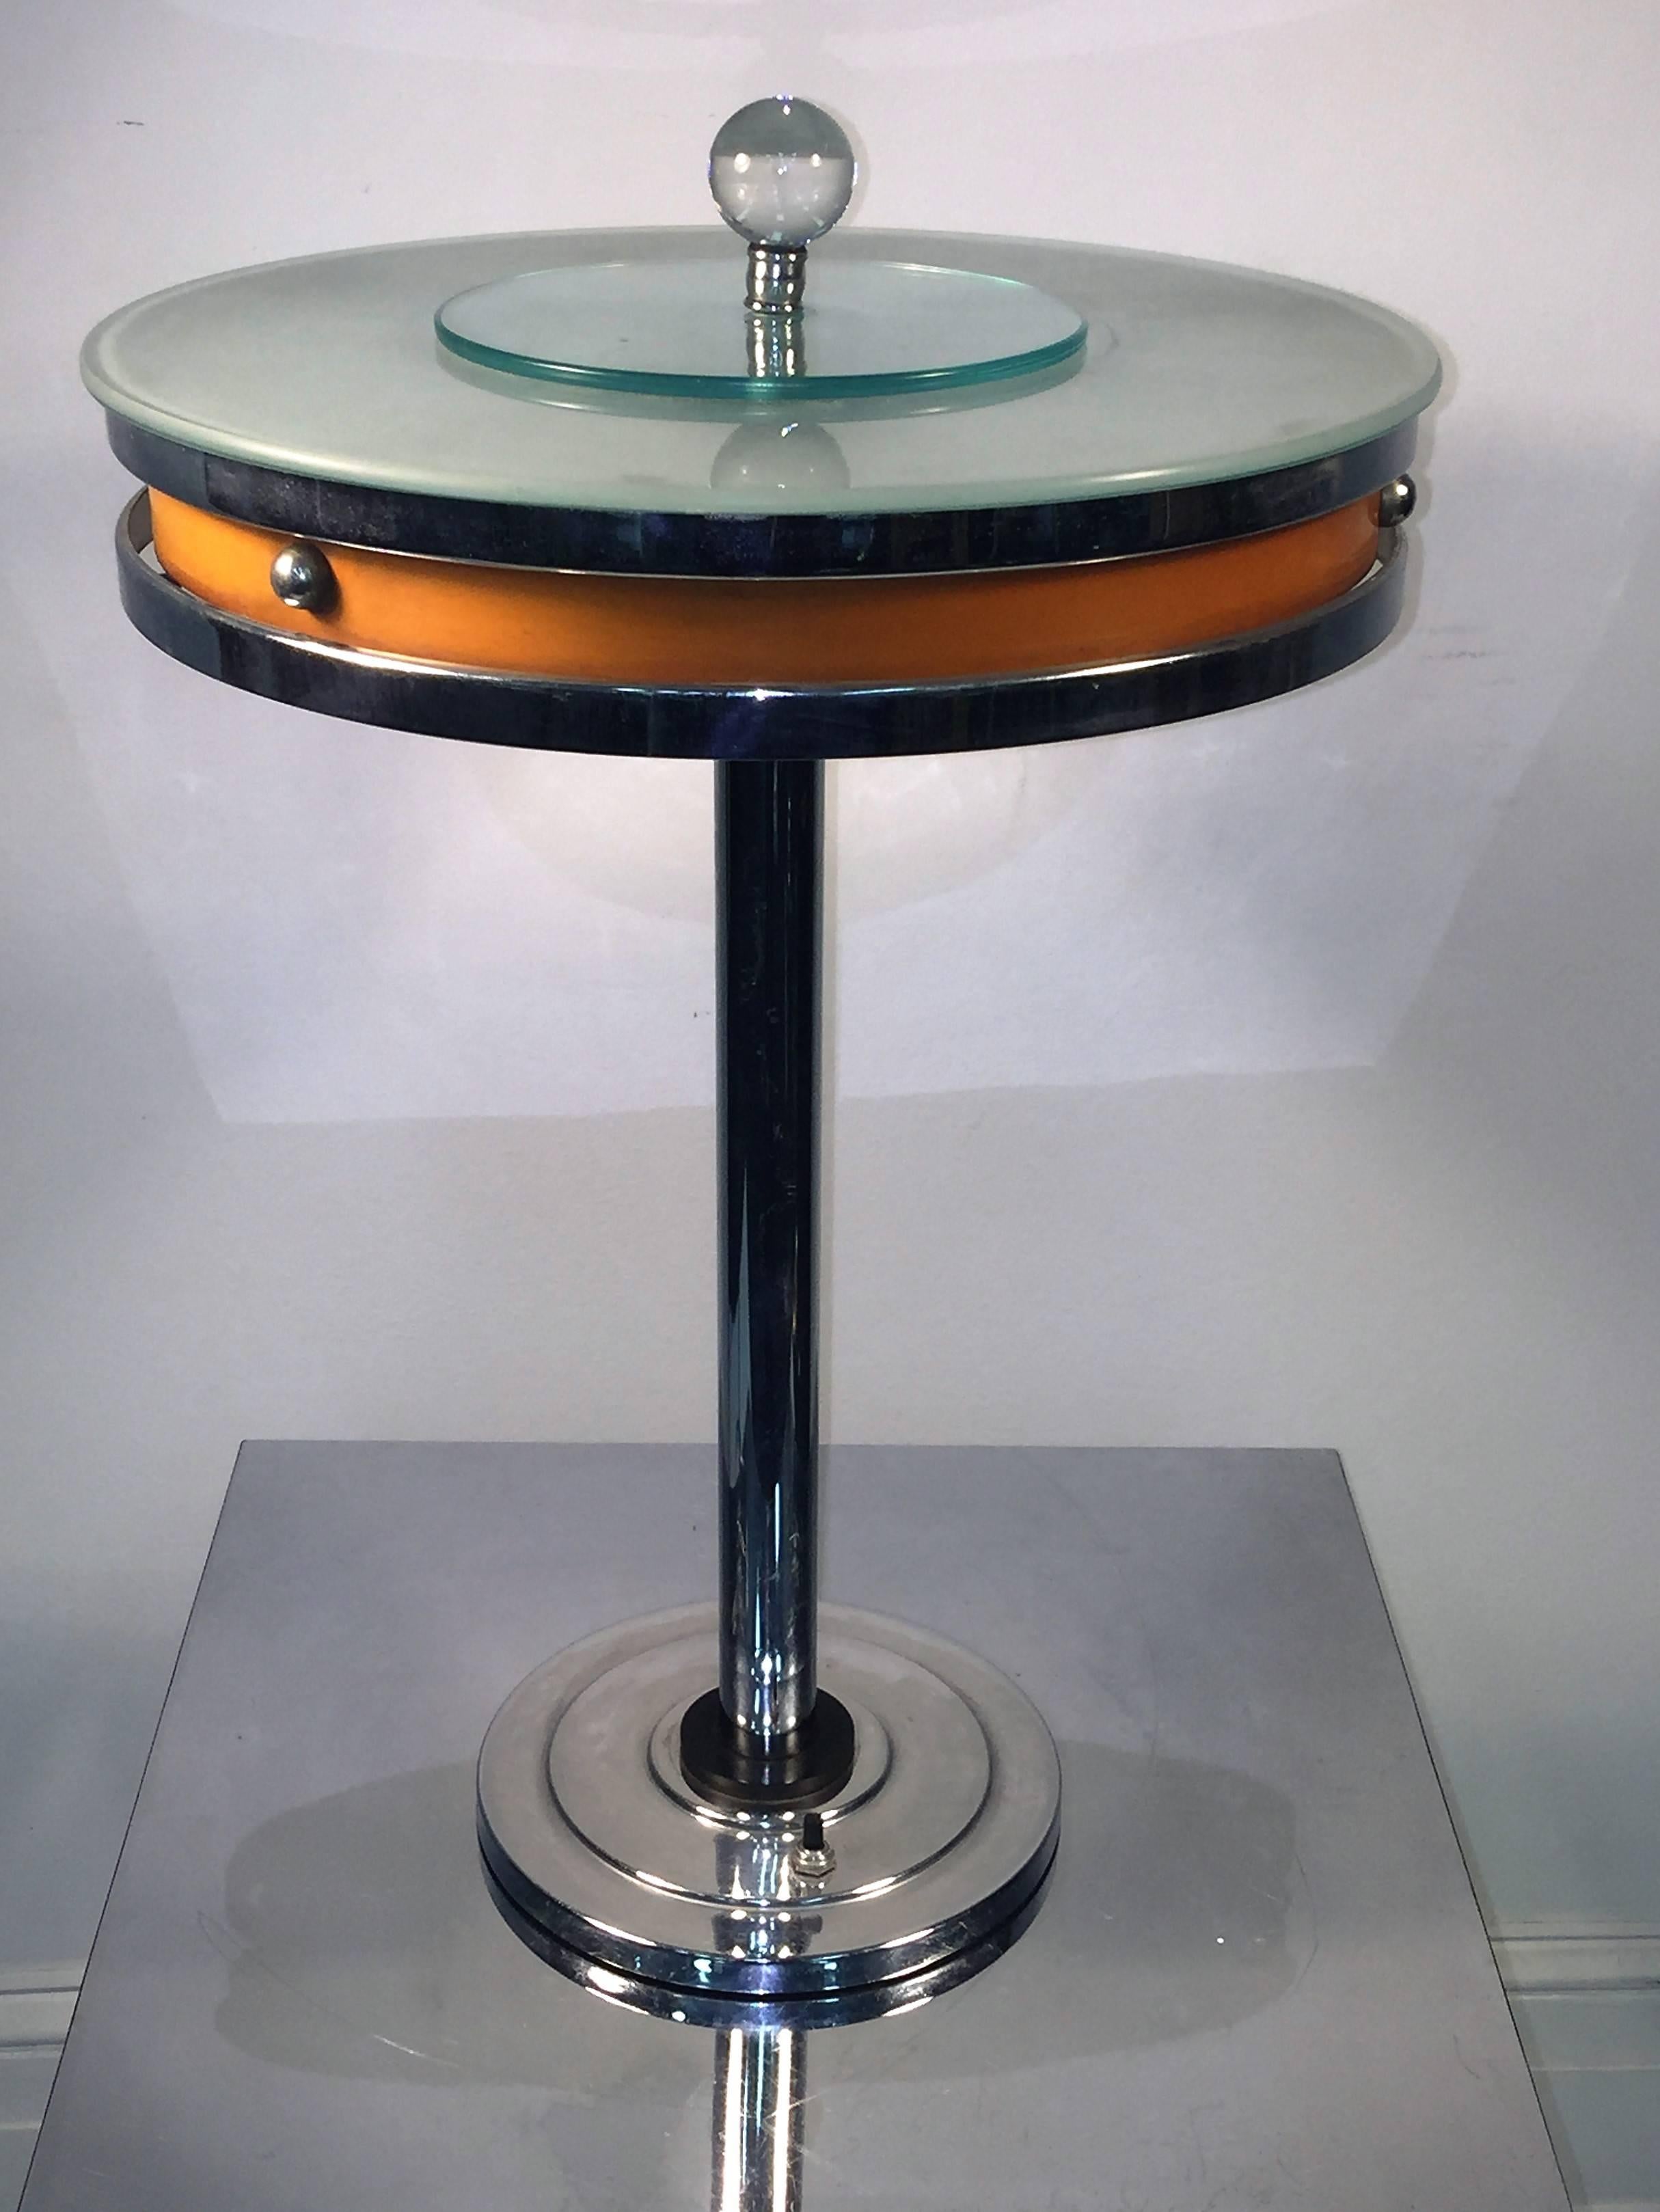 Glamourous yet Machine Age table lamp designed by Kurt Versen. Comprised of chromed brass stem and base, the round disc shaped shade is chromed and enamel brass as well. On the triple ring design base there is a black bakelite disc accent. The top